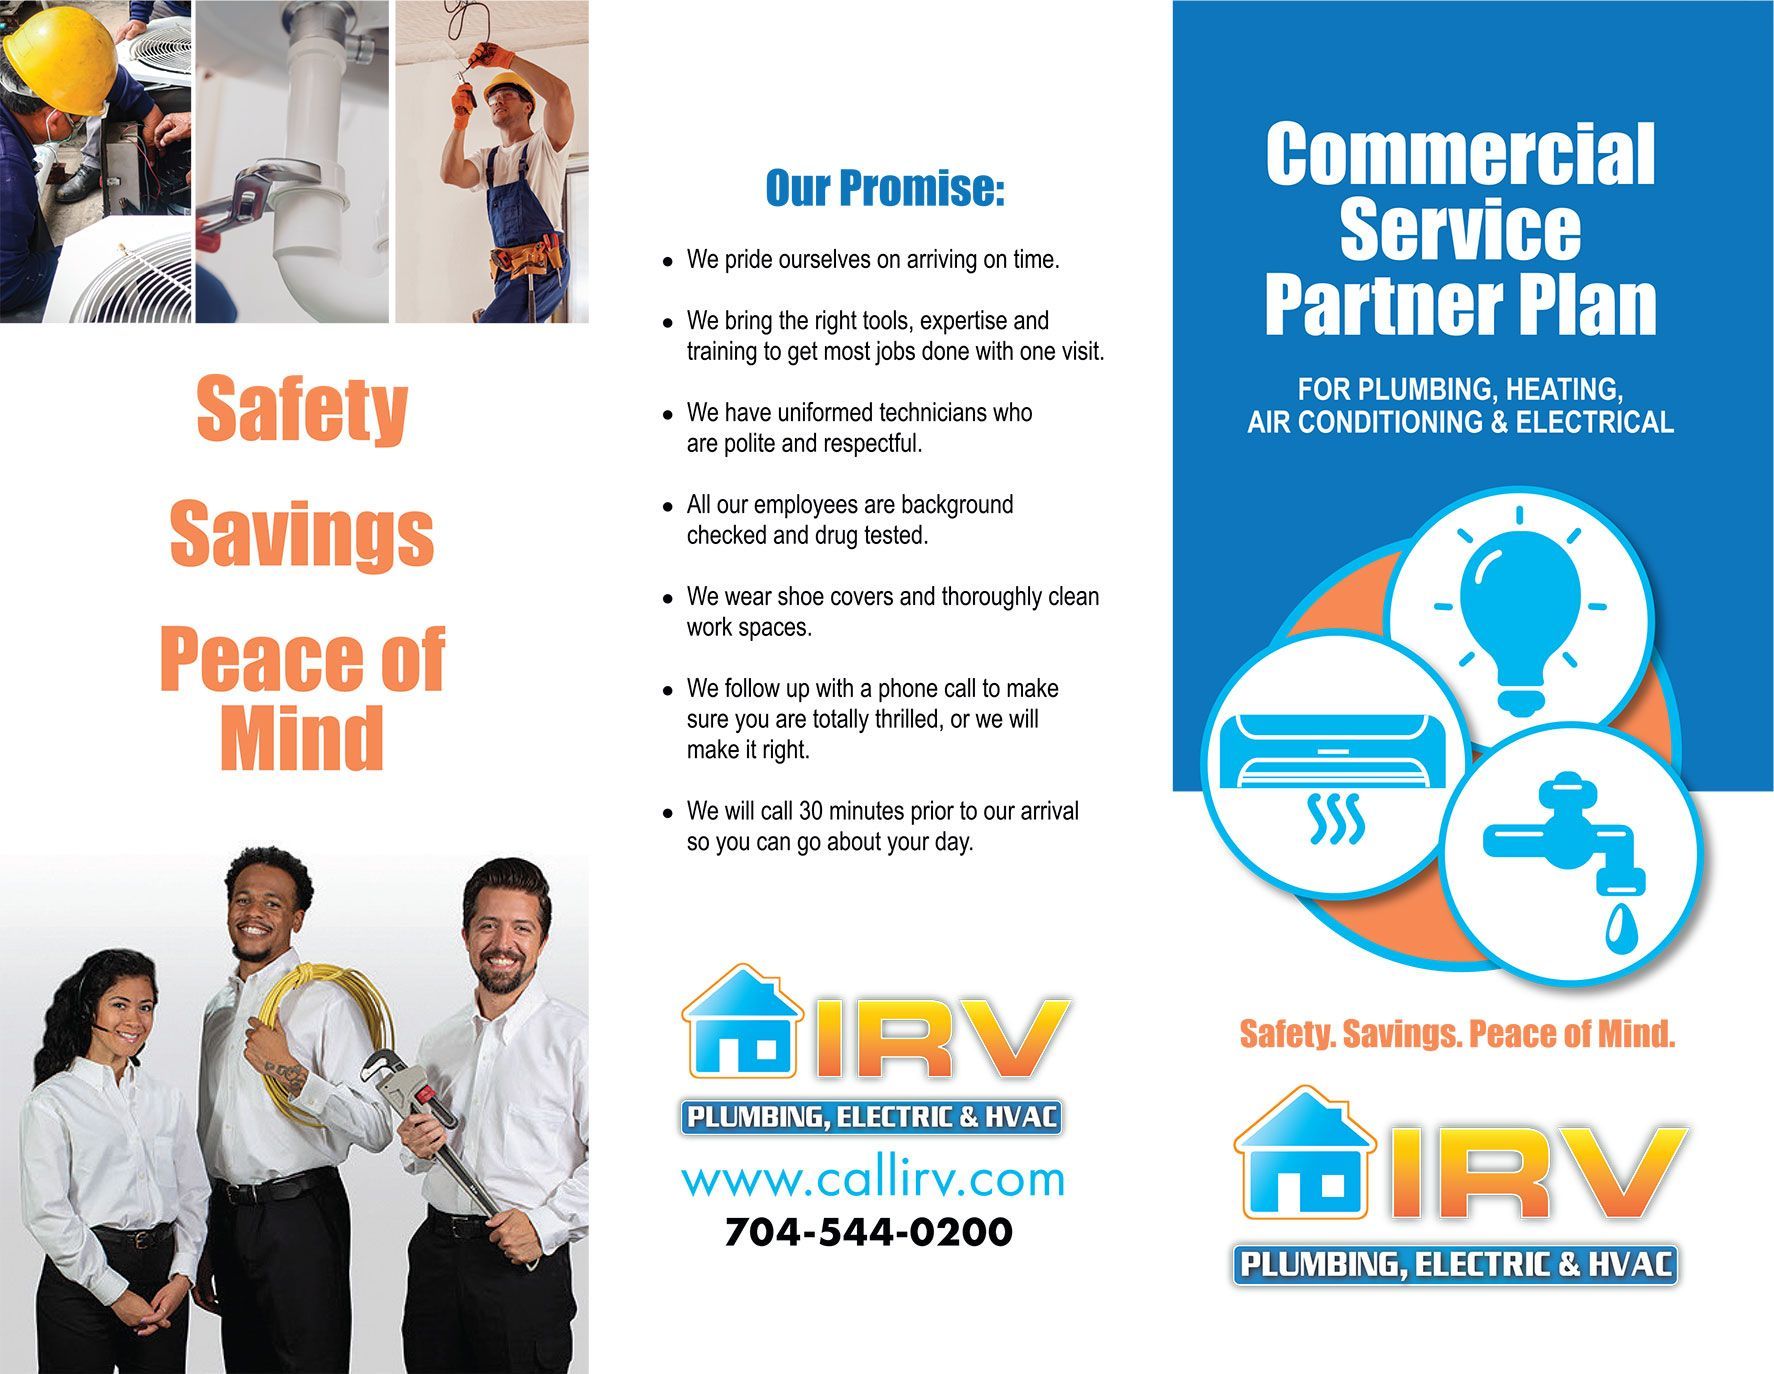 IVR plumbing brochure page 1 Commercial Service